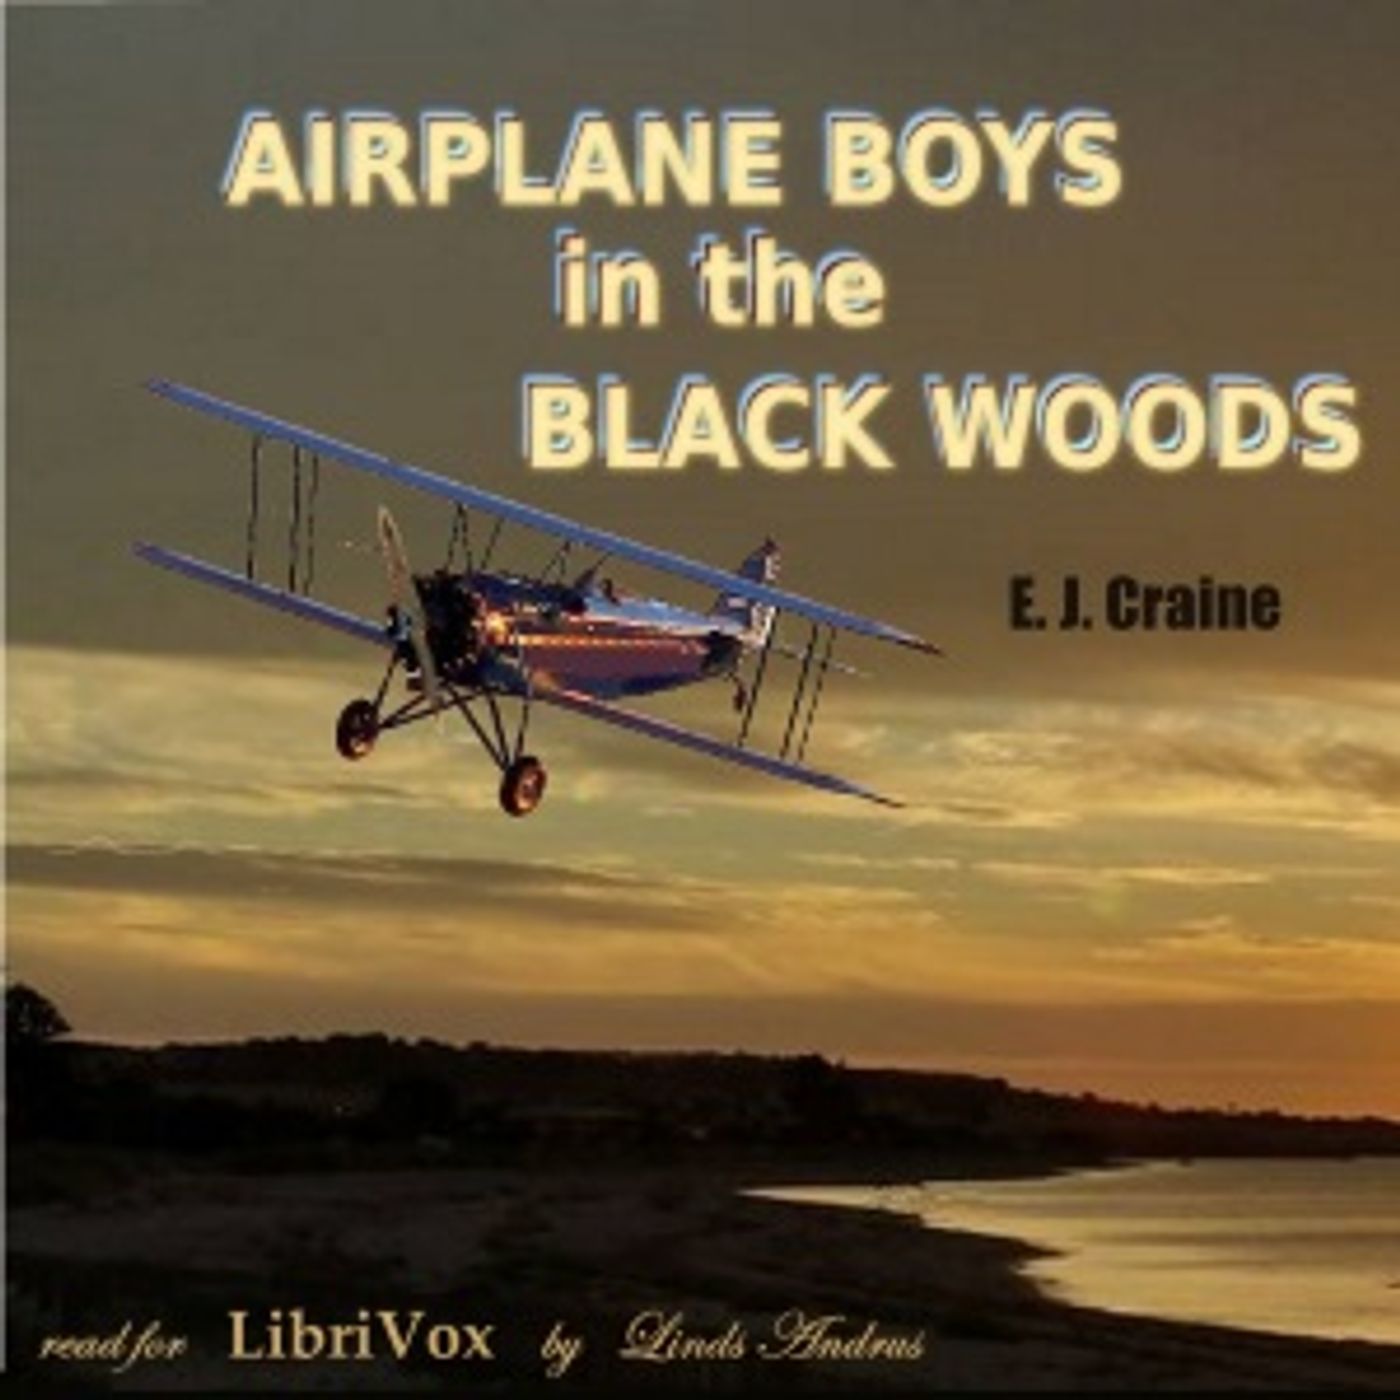 Airplane Boys in the Black Woods by E. J. Craine (1881 – )